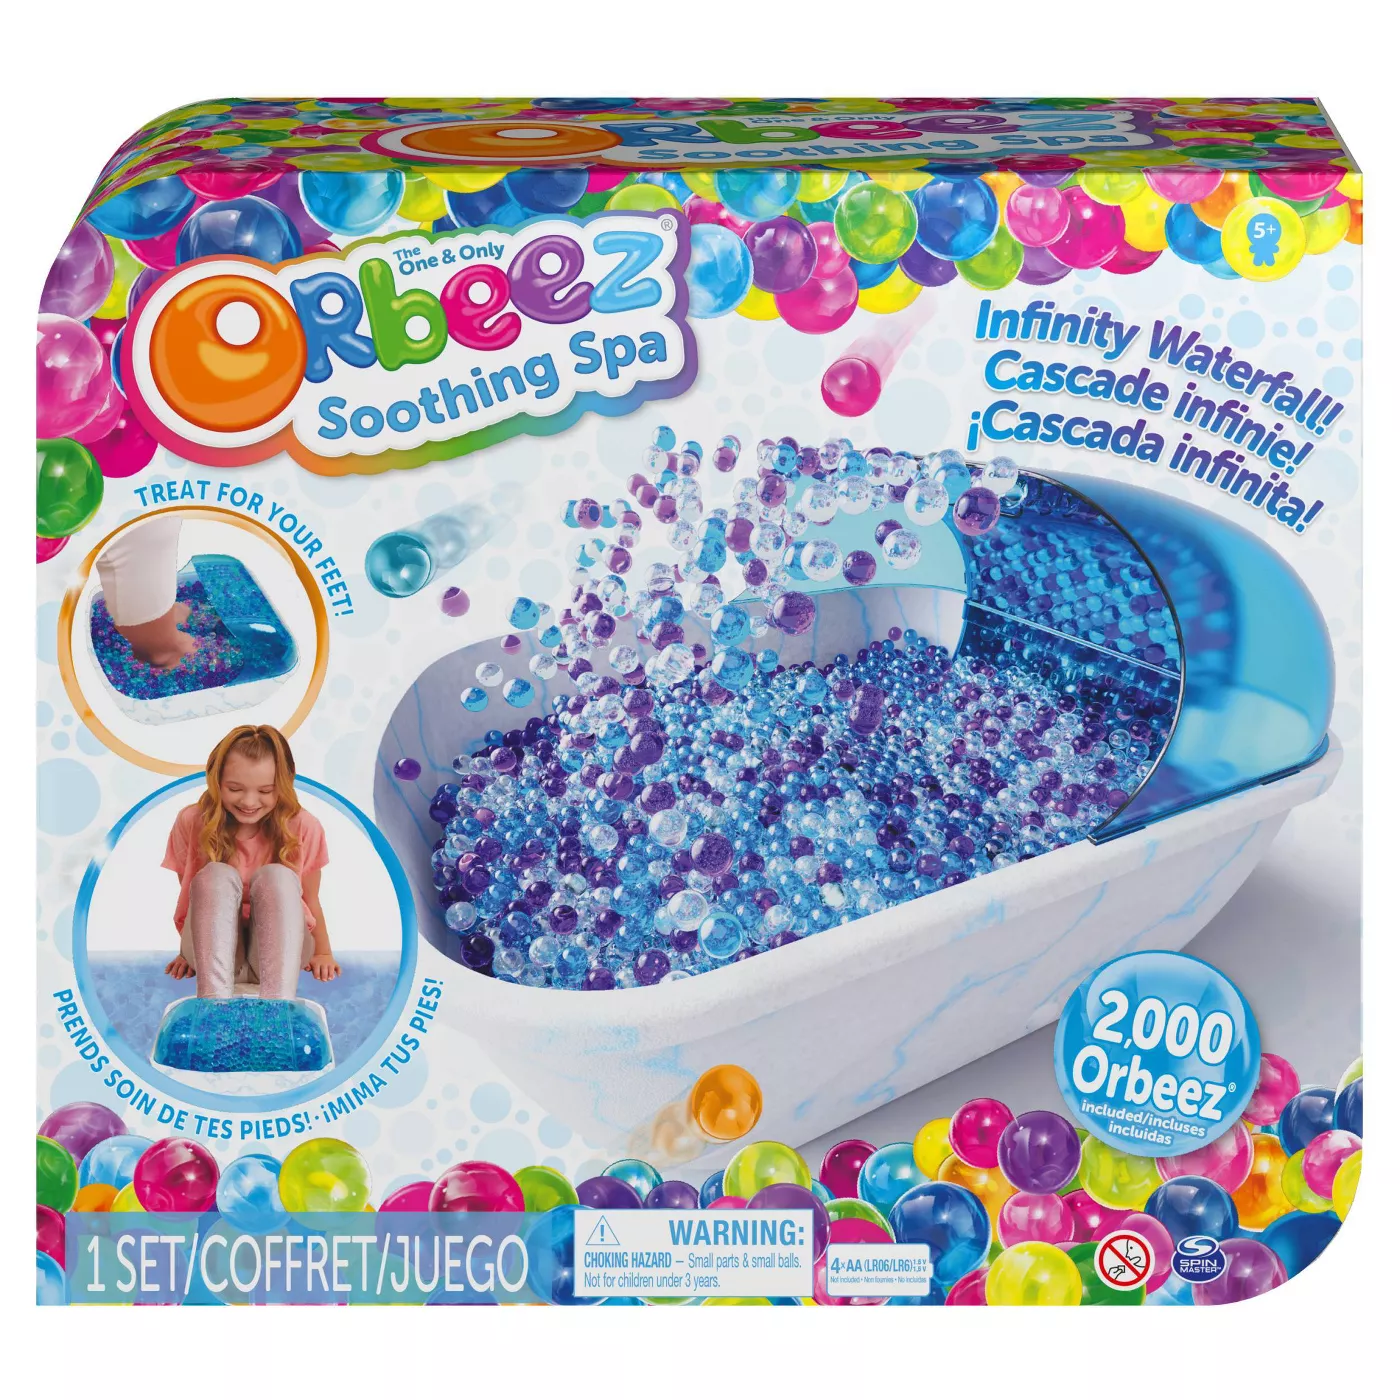 An Orbeez soothing spa kit